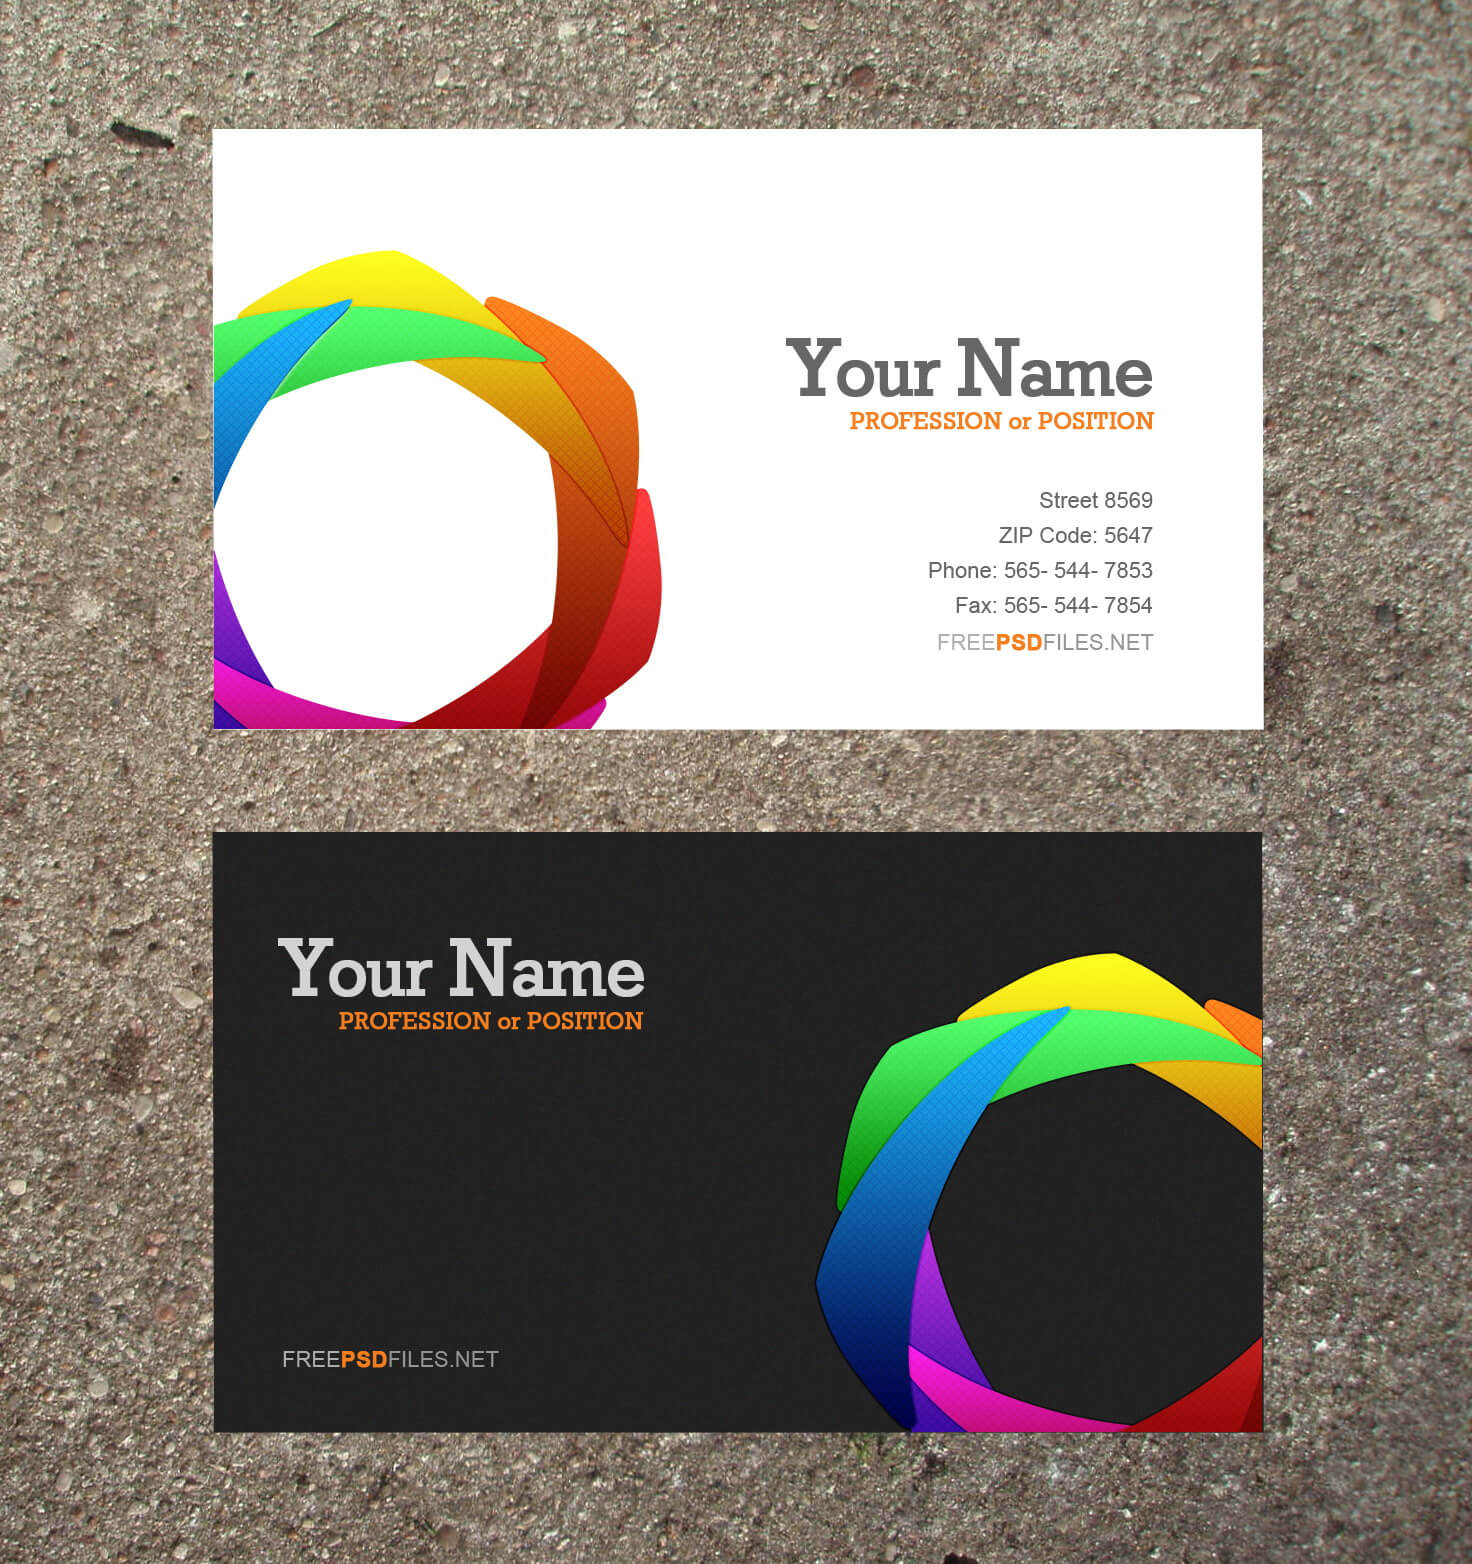 28+ [ Business Card Powerpoint Templates Free ] | Free With Regard To Business Card Template Powerpoint Free